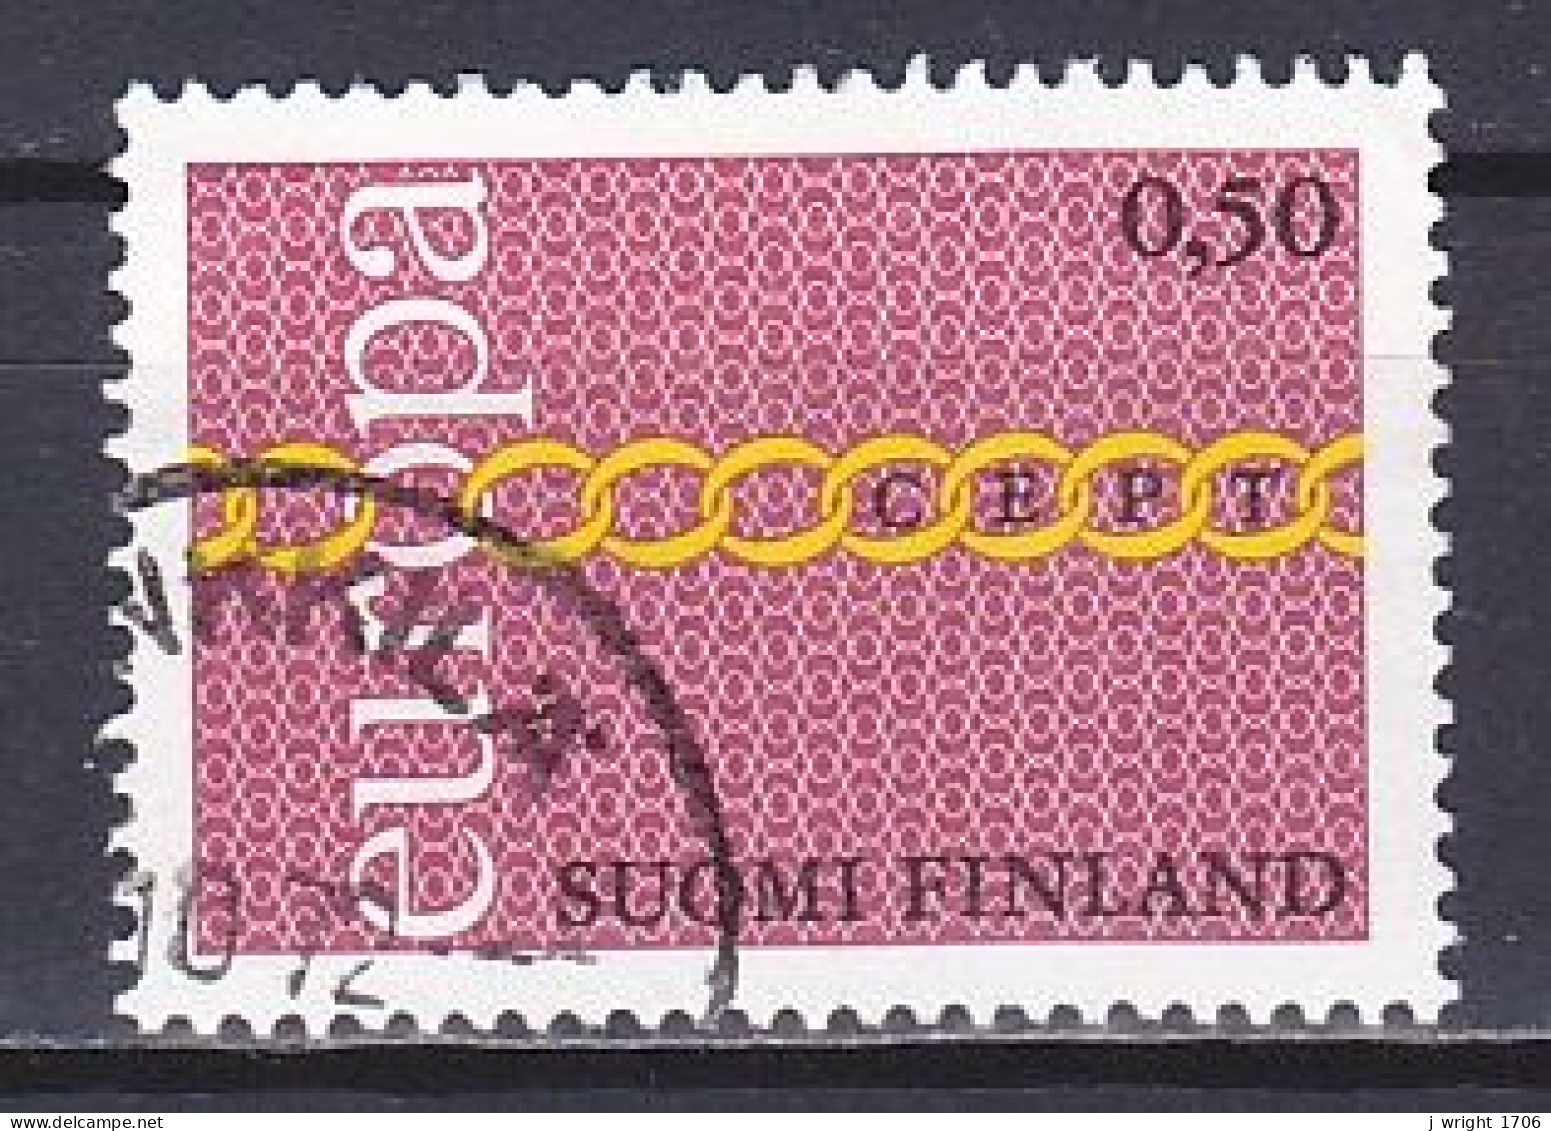 Finland, 1971, Europa CEPT, 0.50mk, USED - Used Stamps